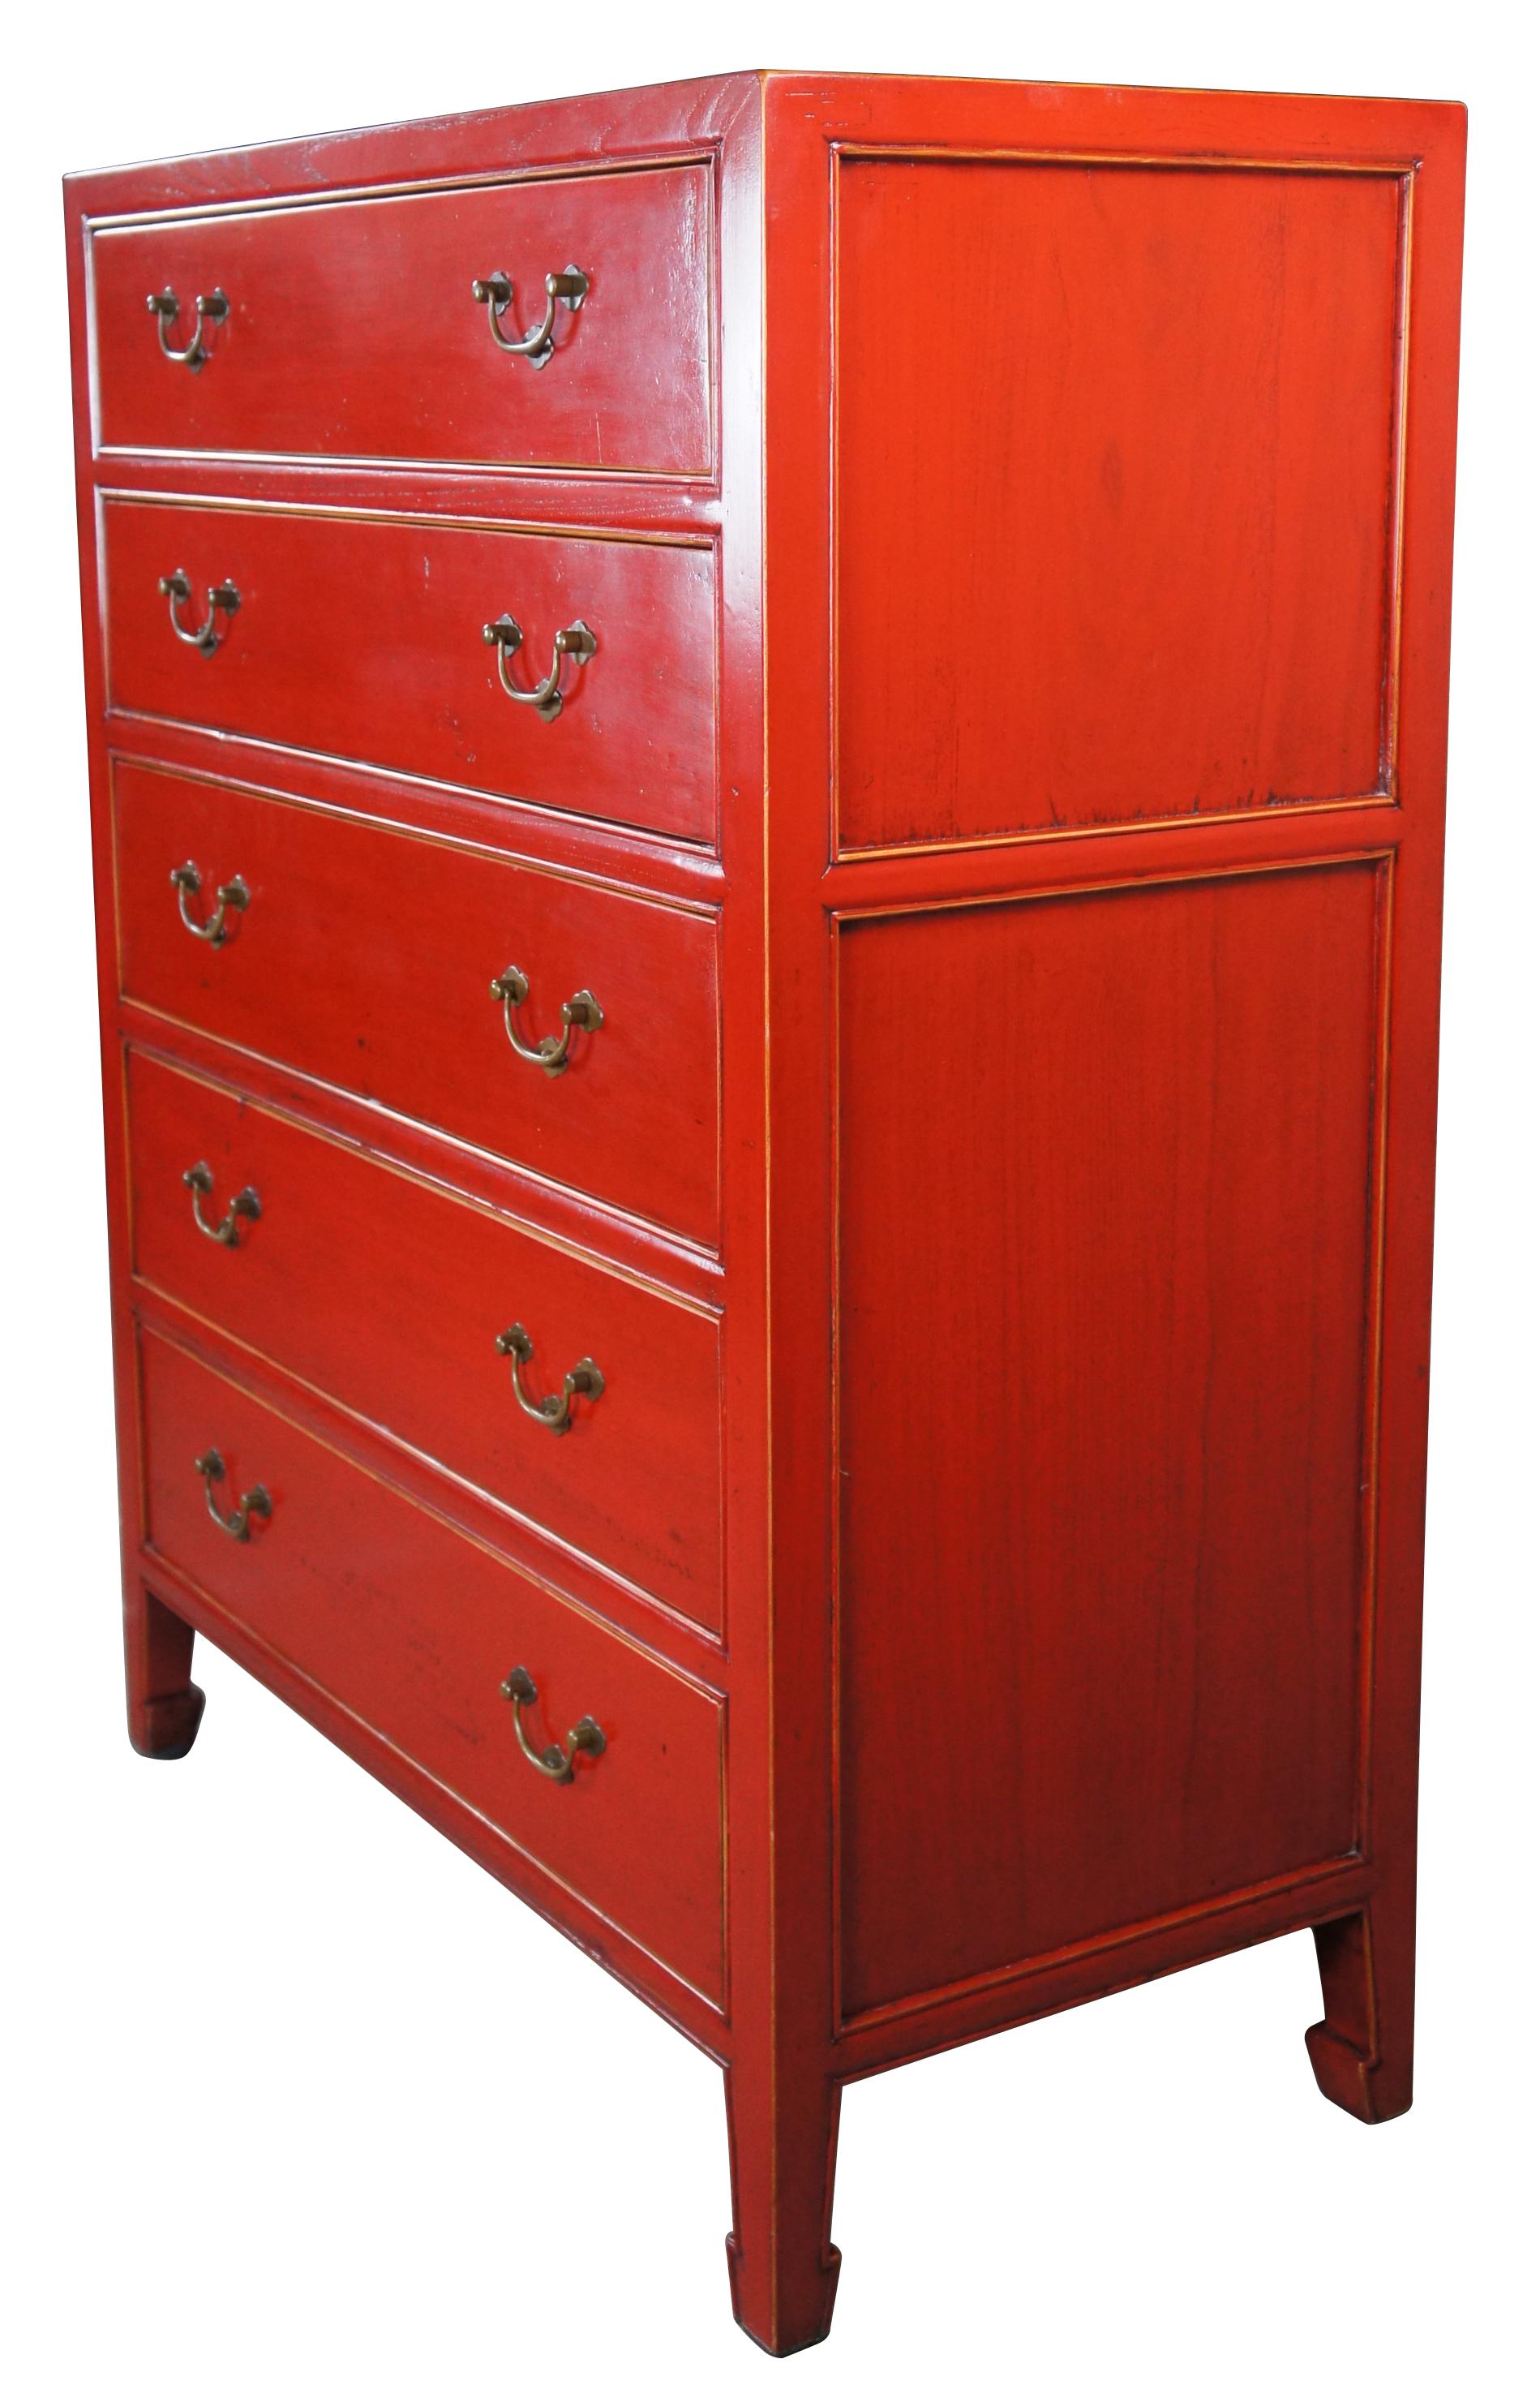 An impressive modern chinese red lacquer dresser, circa last half 20th century. Made from elm with classic Ming styling. Features 5 dovetailed drawers with brass bail hardware over tapered legs. With its vivid red color and natural wood undertones